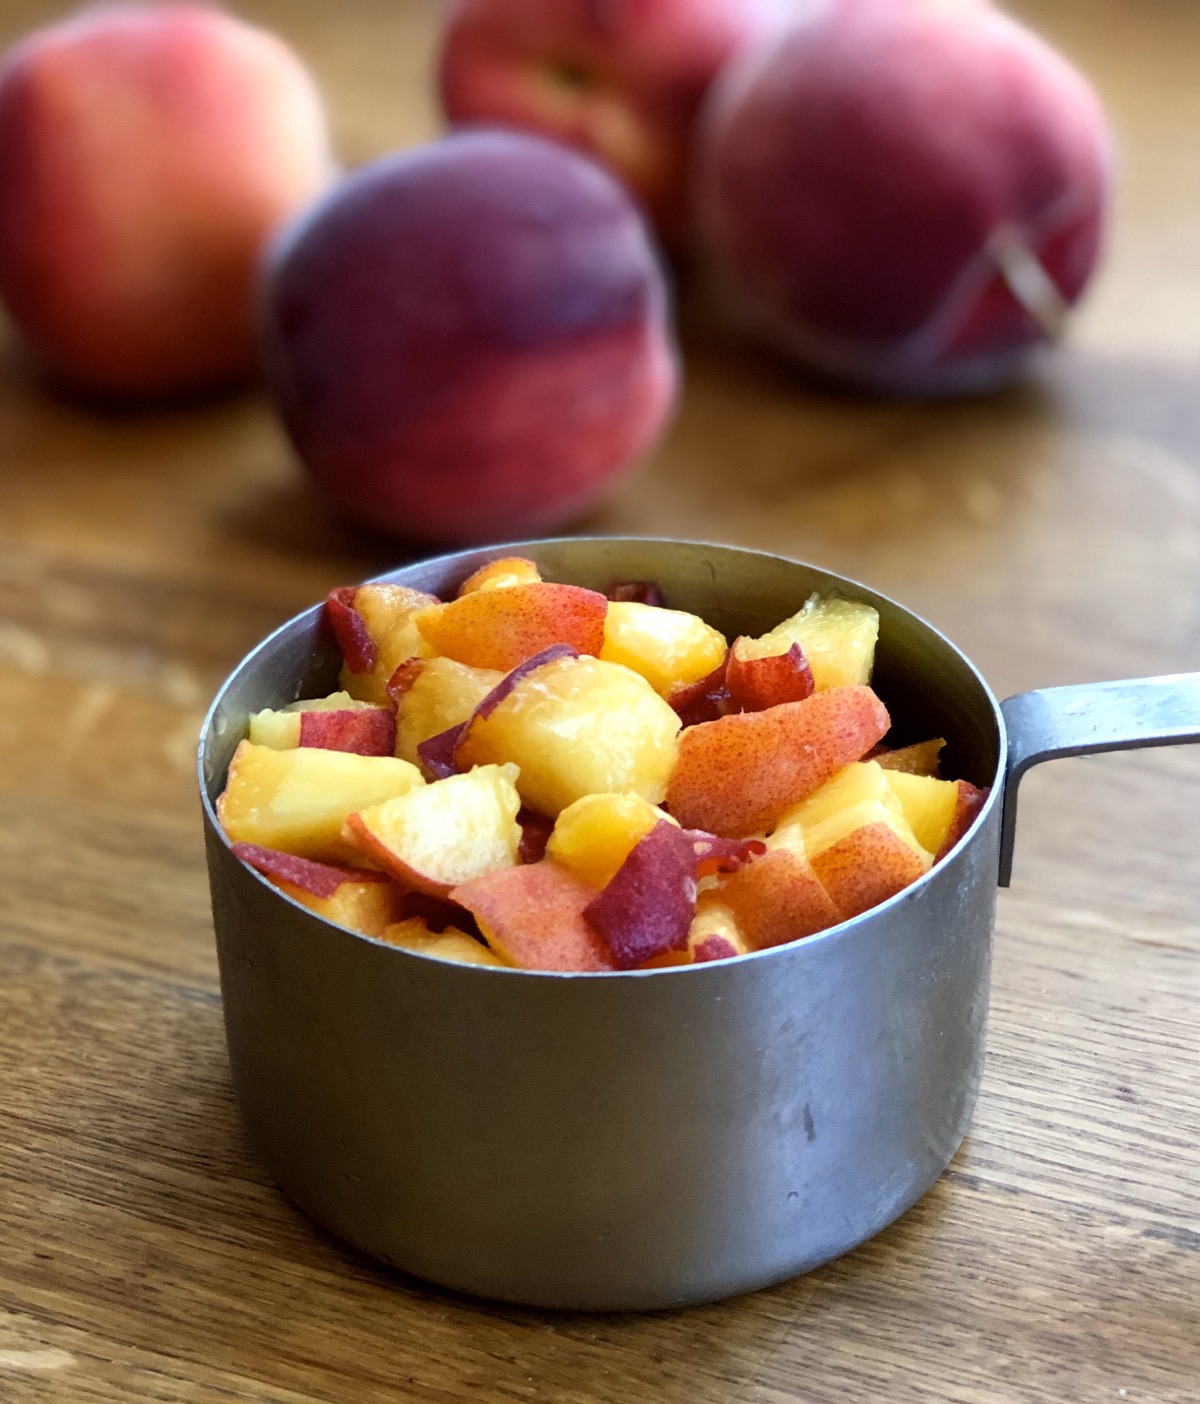 Diced unpeeled peaches in a measuring cup, whole unpeeled peaches in the background.